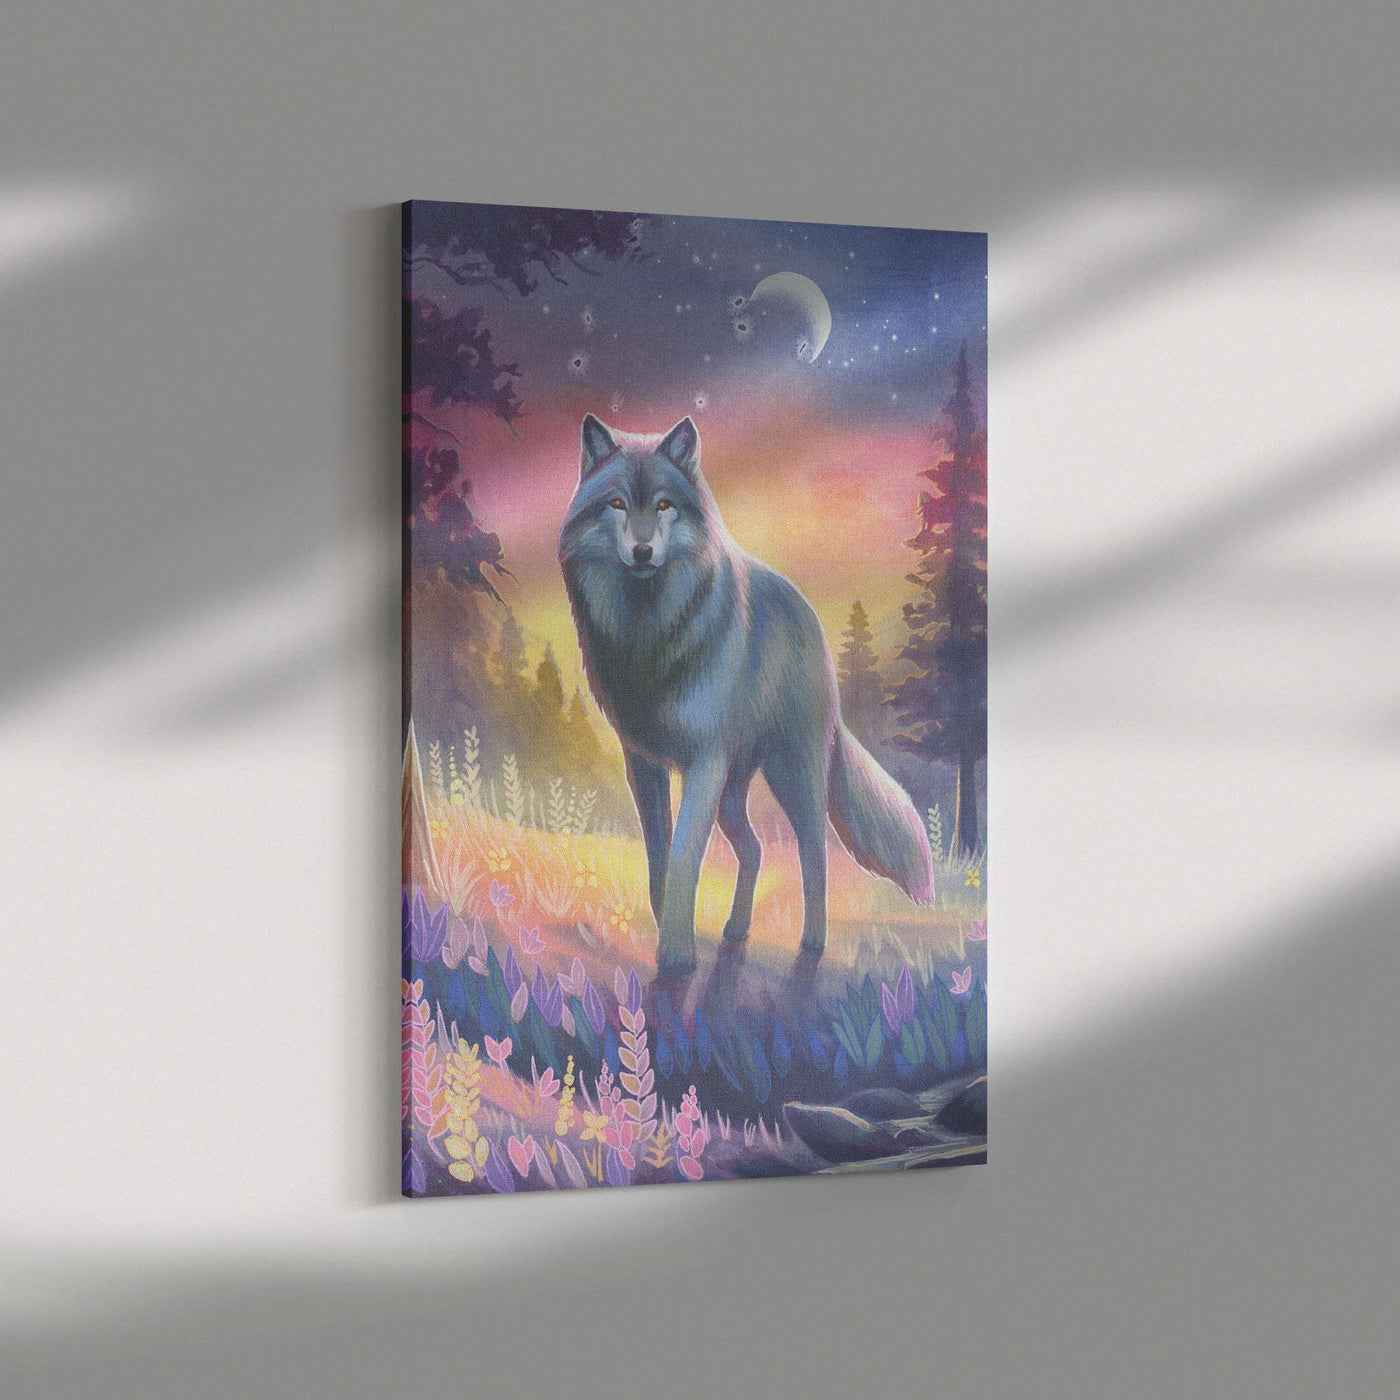 Canvas Wolf Art Print of a wolf standing in a mystical forest under a moonlit sky with vibrant purple and orange hues.